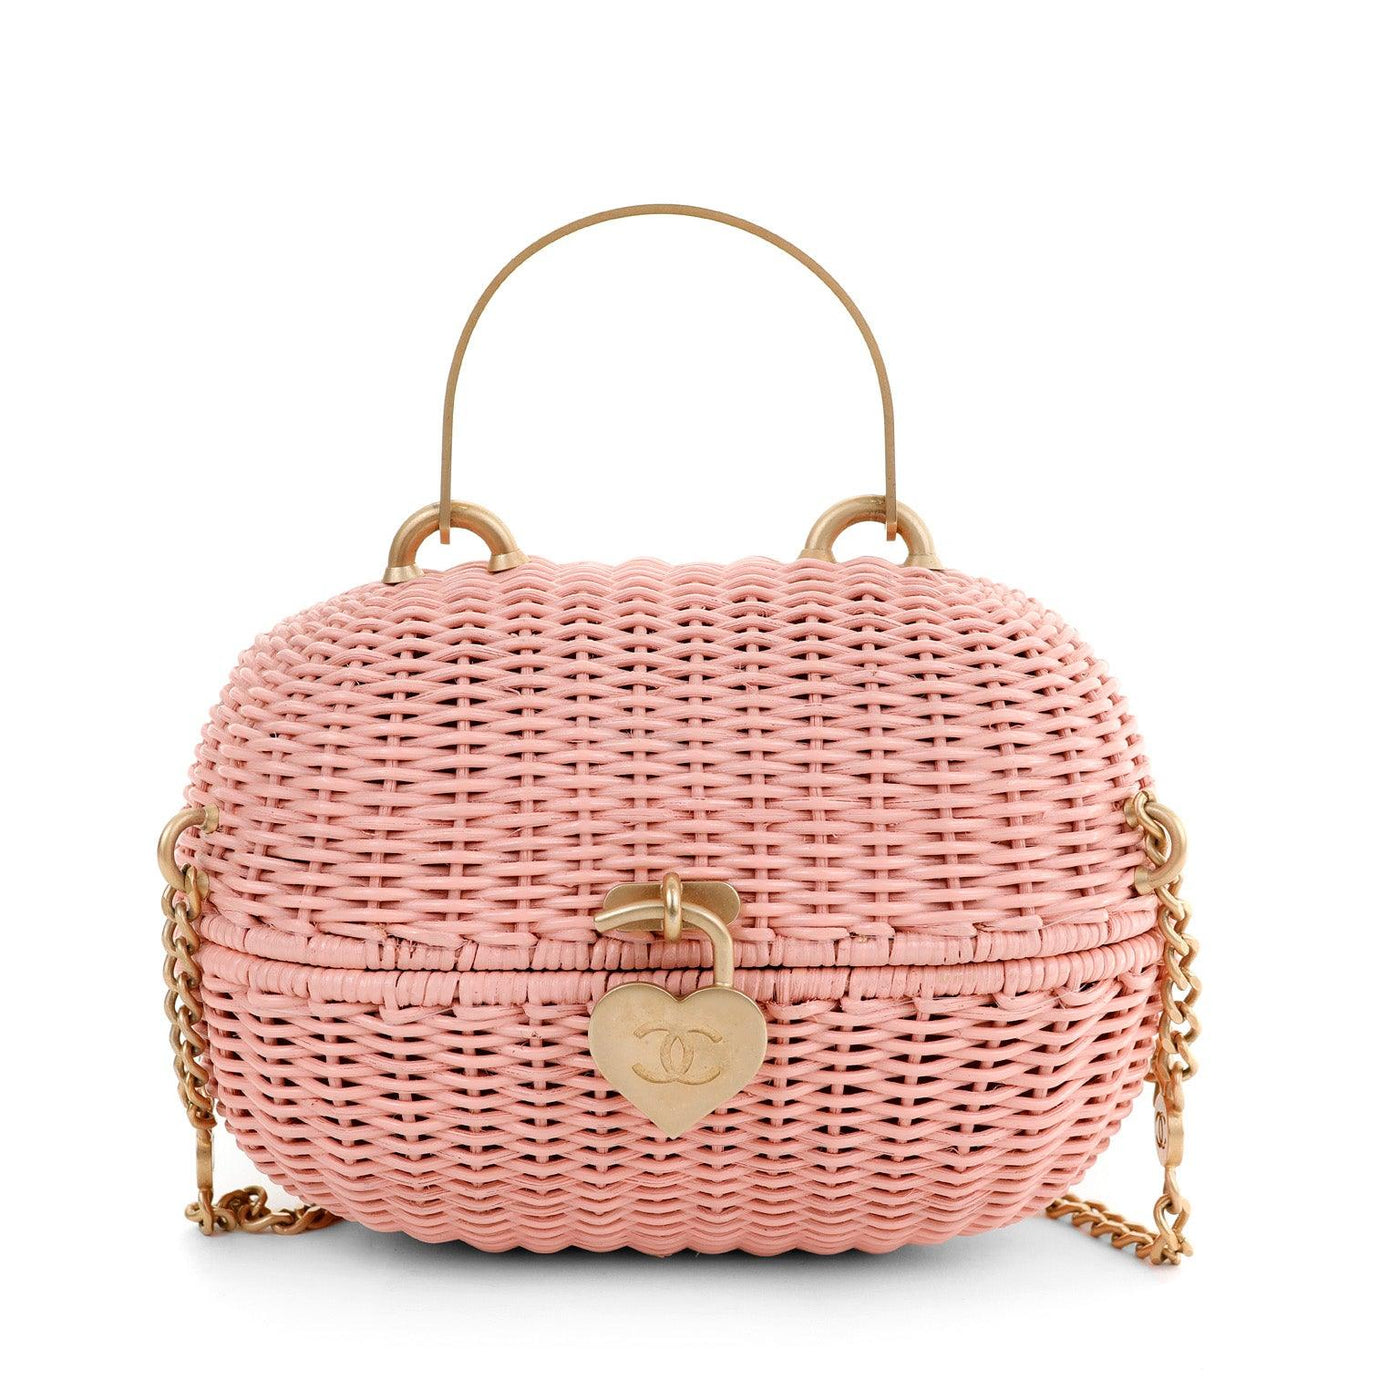 Chanel Pink Wicker Love Basket Runway Bag - Only Authentics